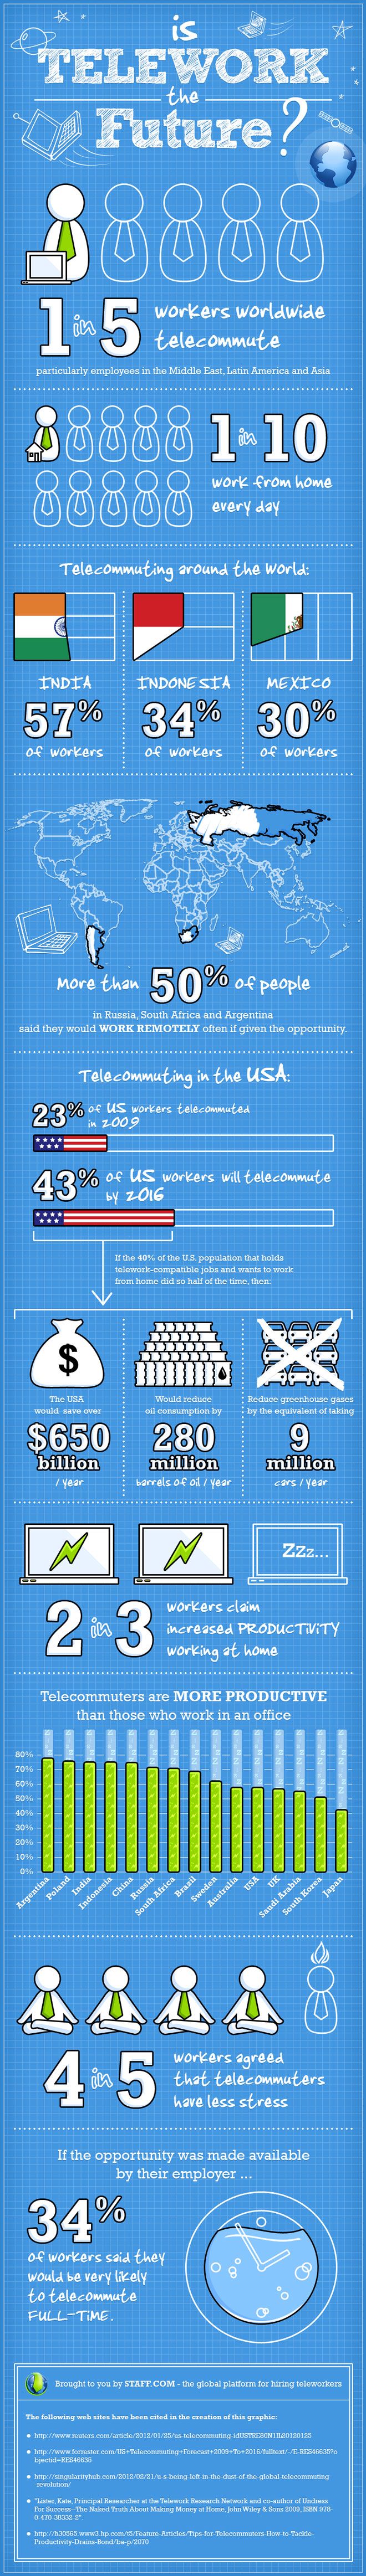 Is Telework the Future? [Infographic]